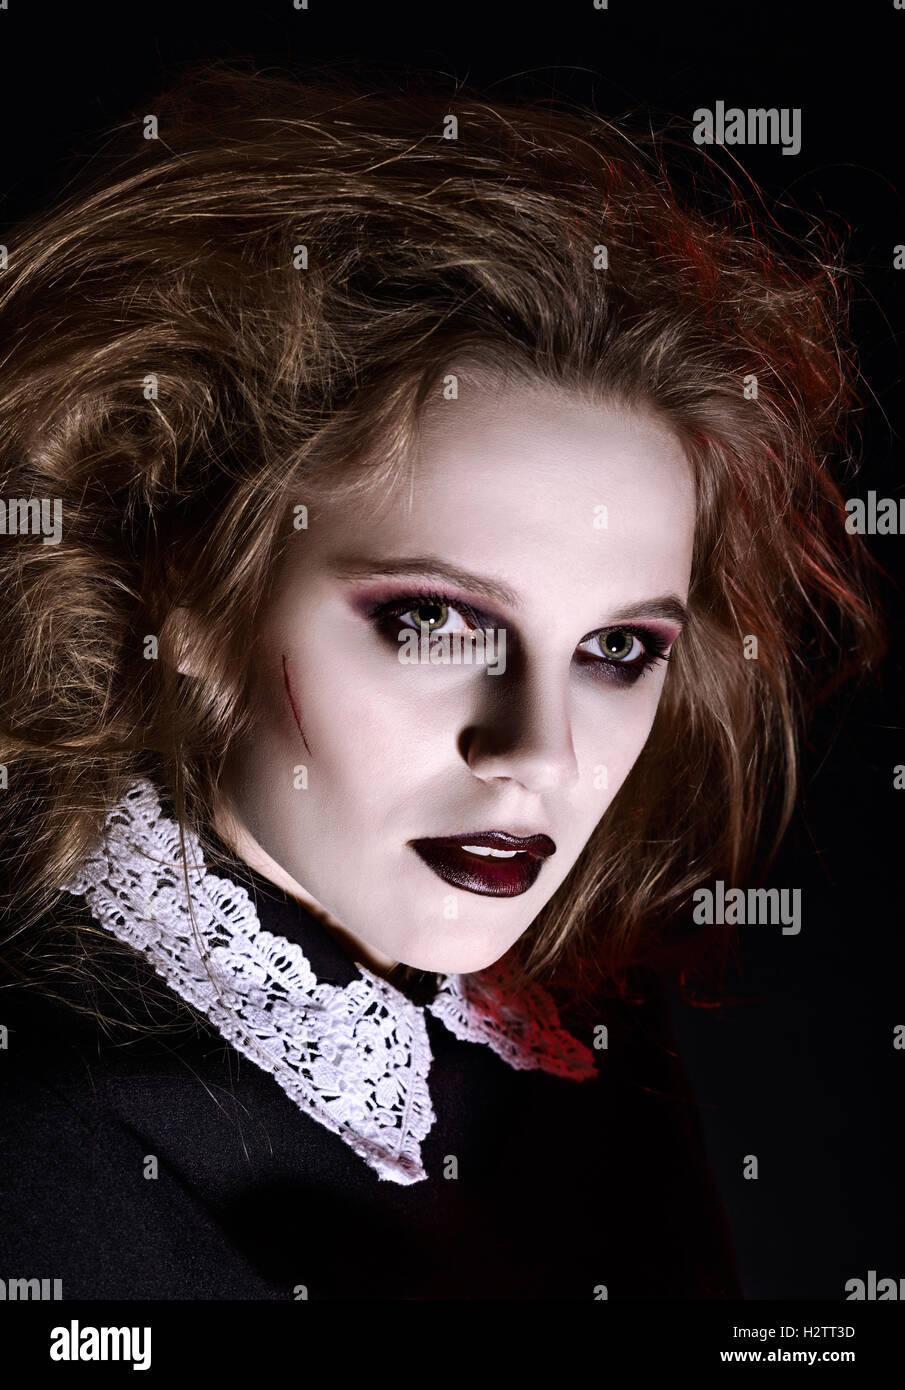 Scary Goth Girl Stock Photo